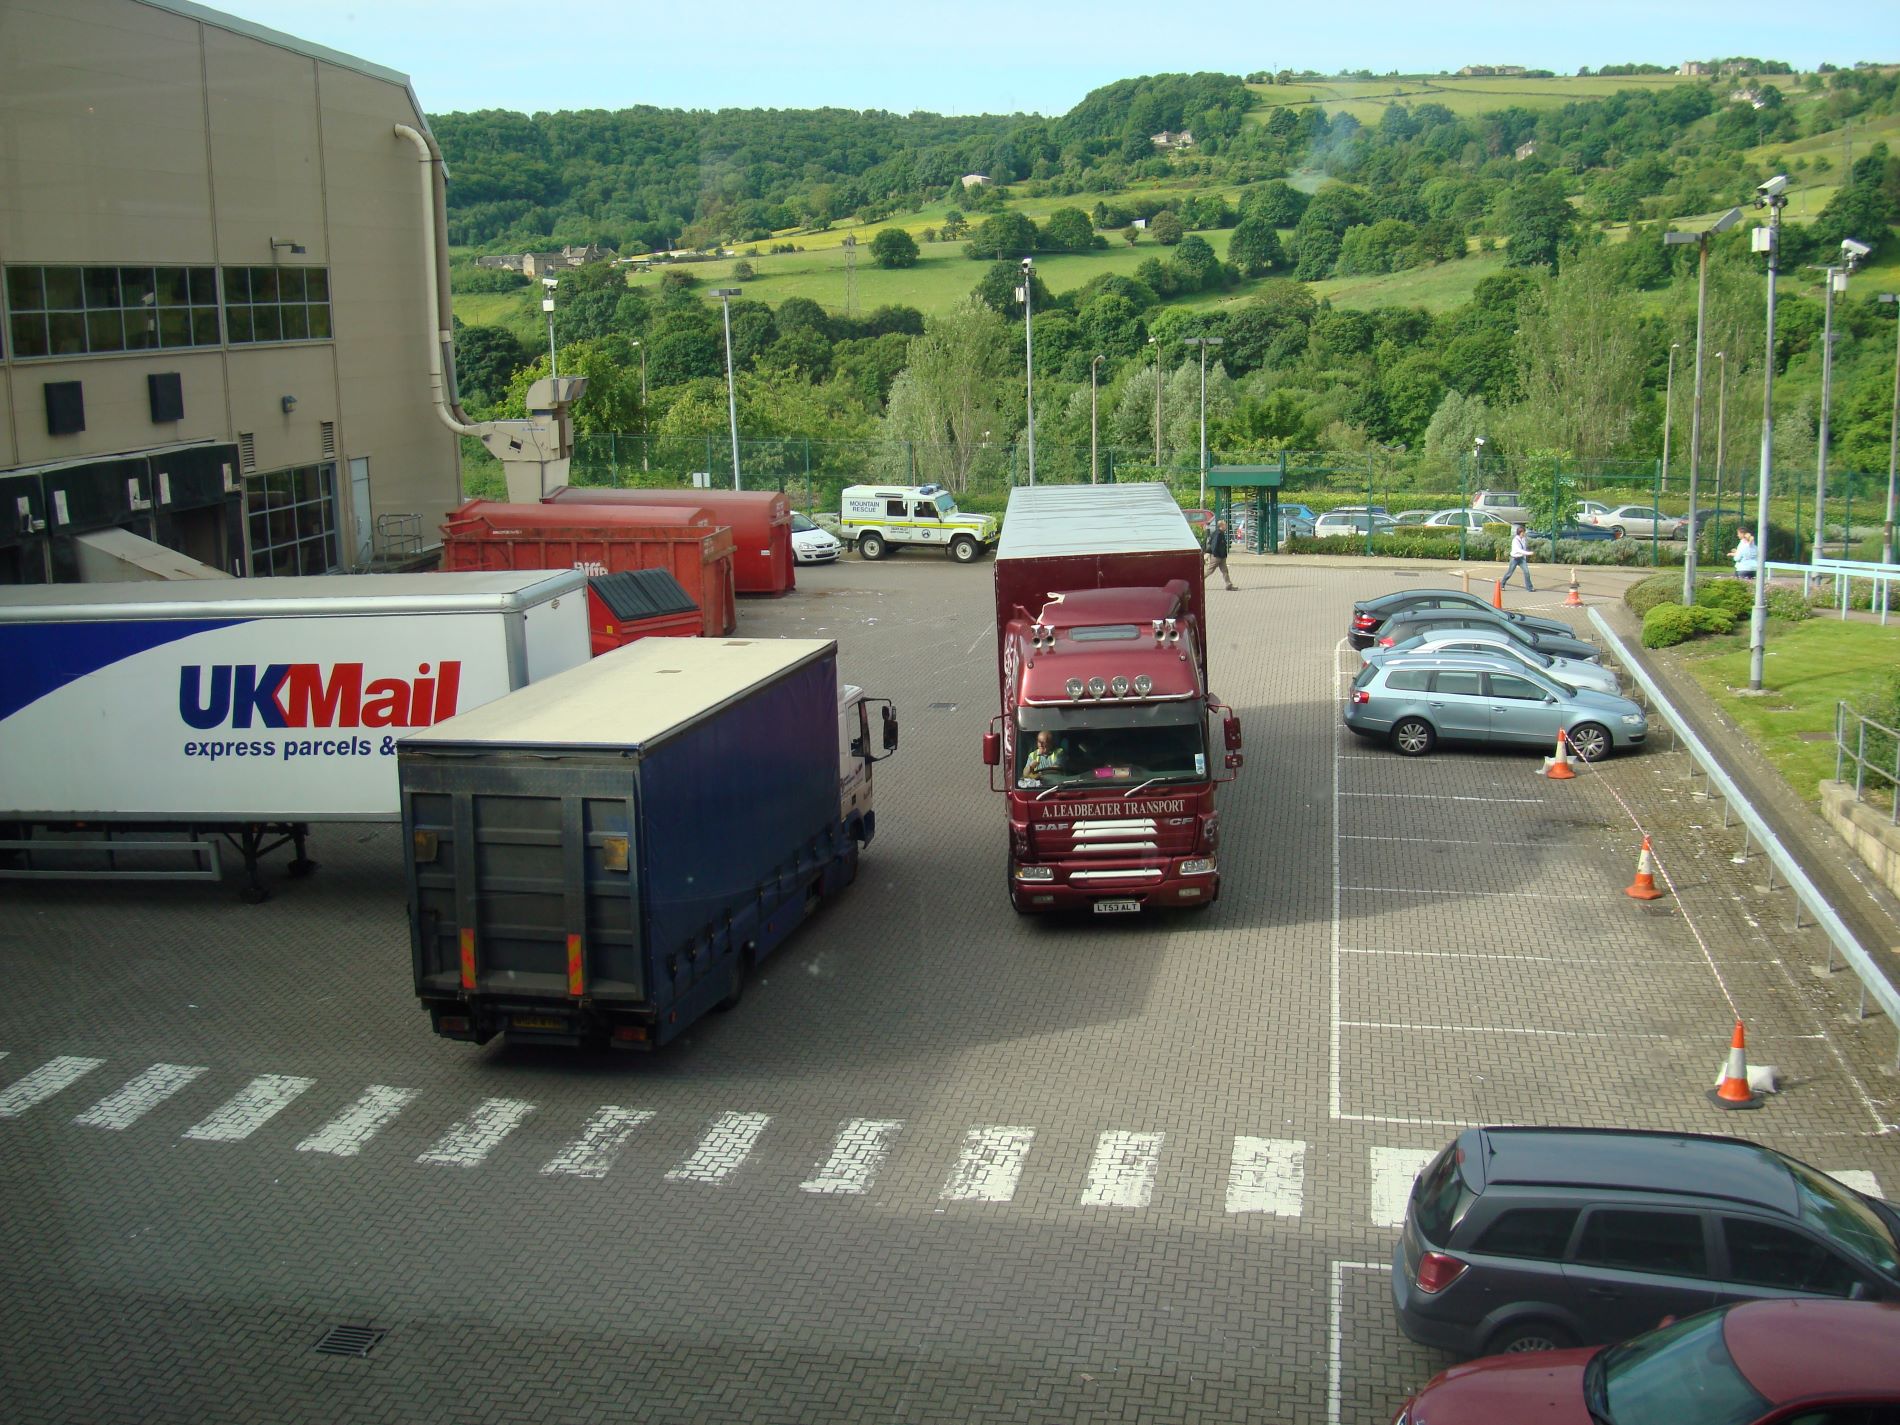 Several lorries delivering to the back of a large store.